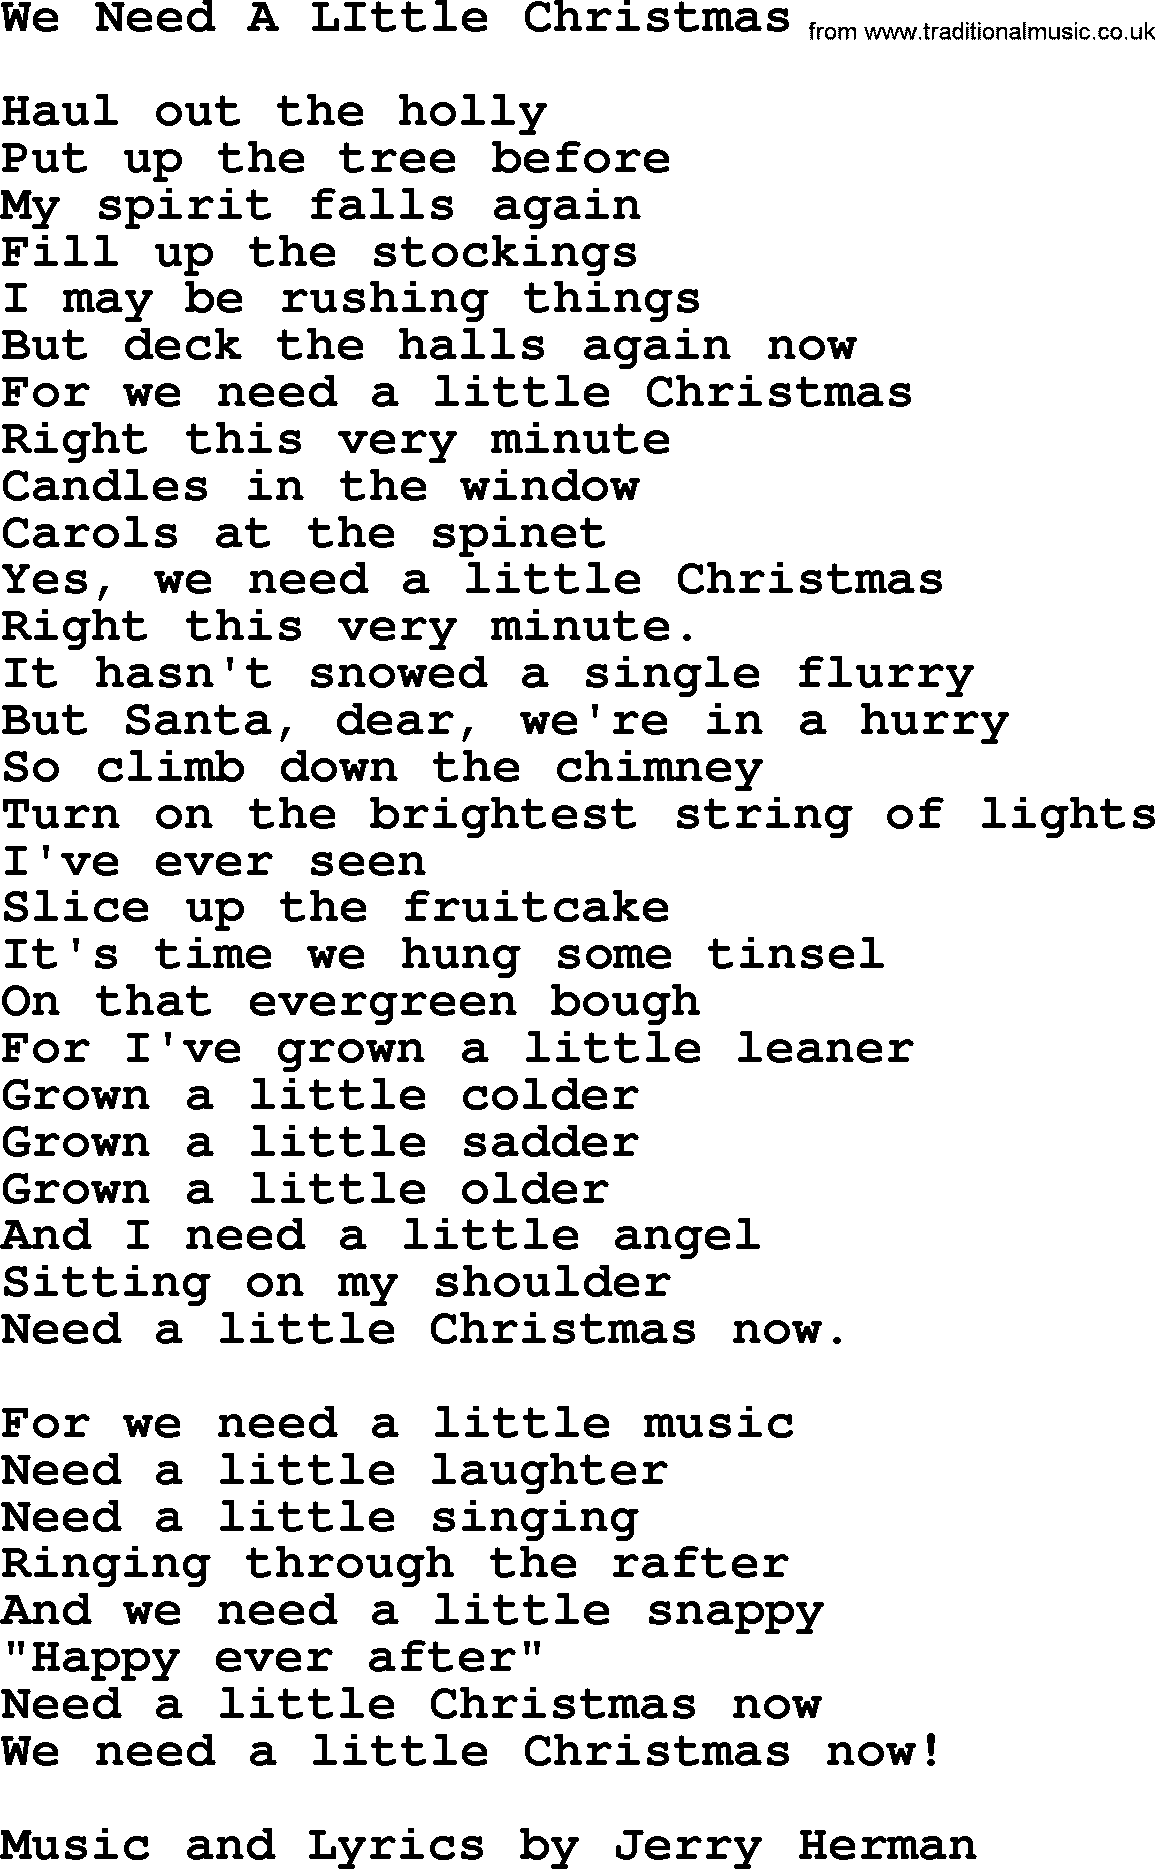 The Byrds song We Need A Little Christmas, lyrics